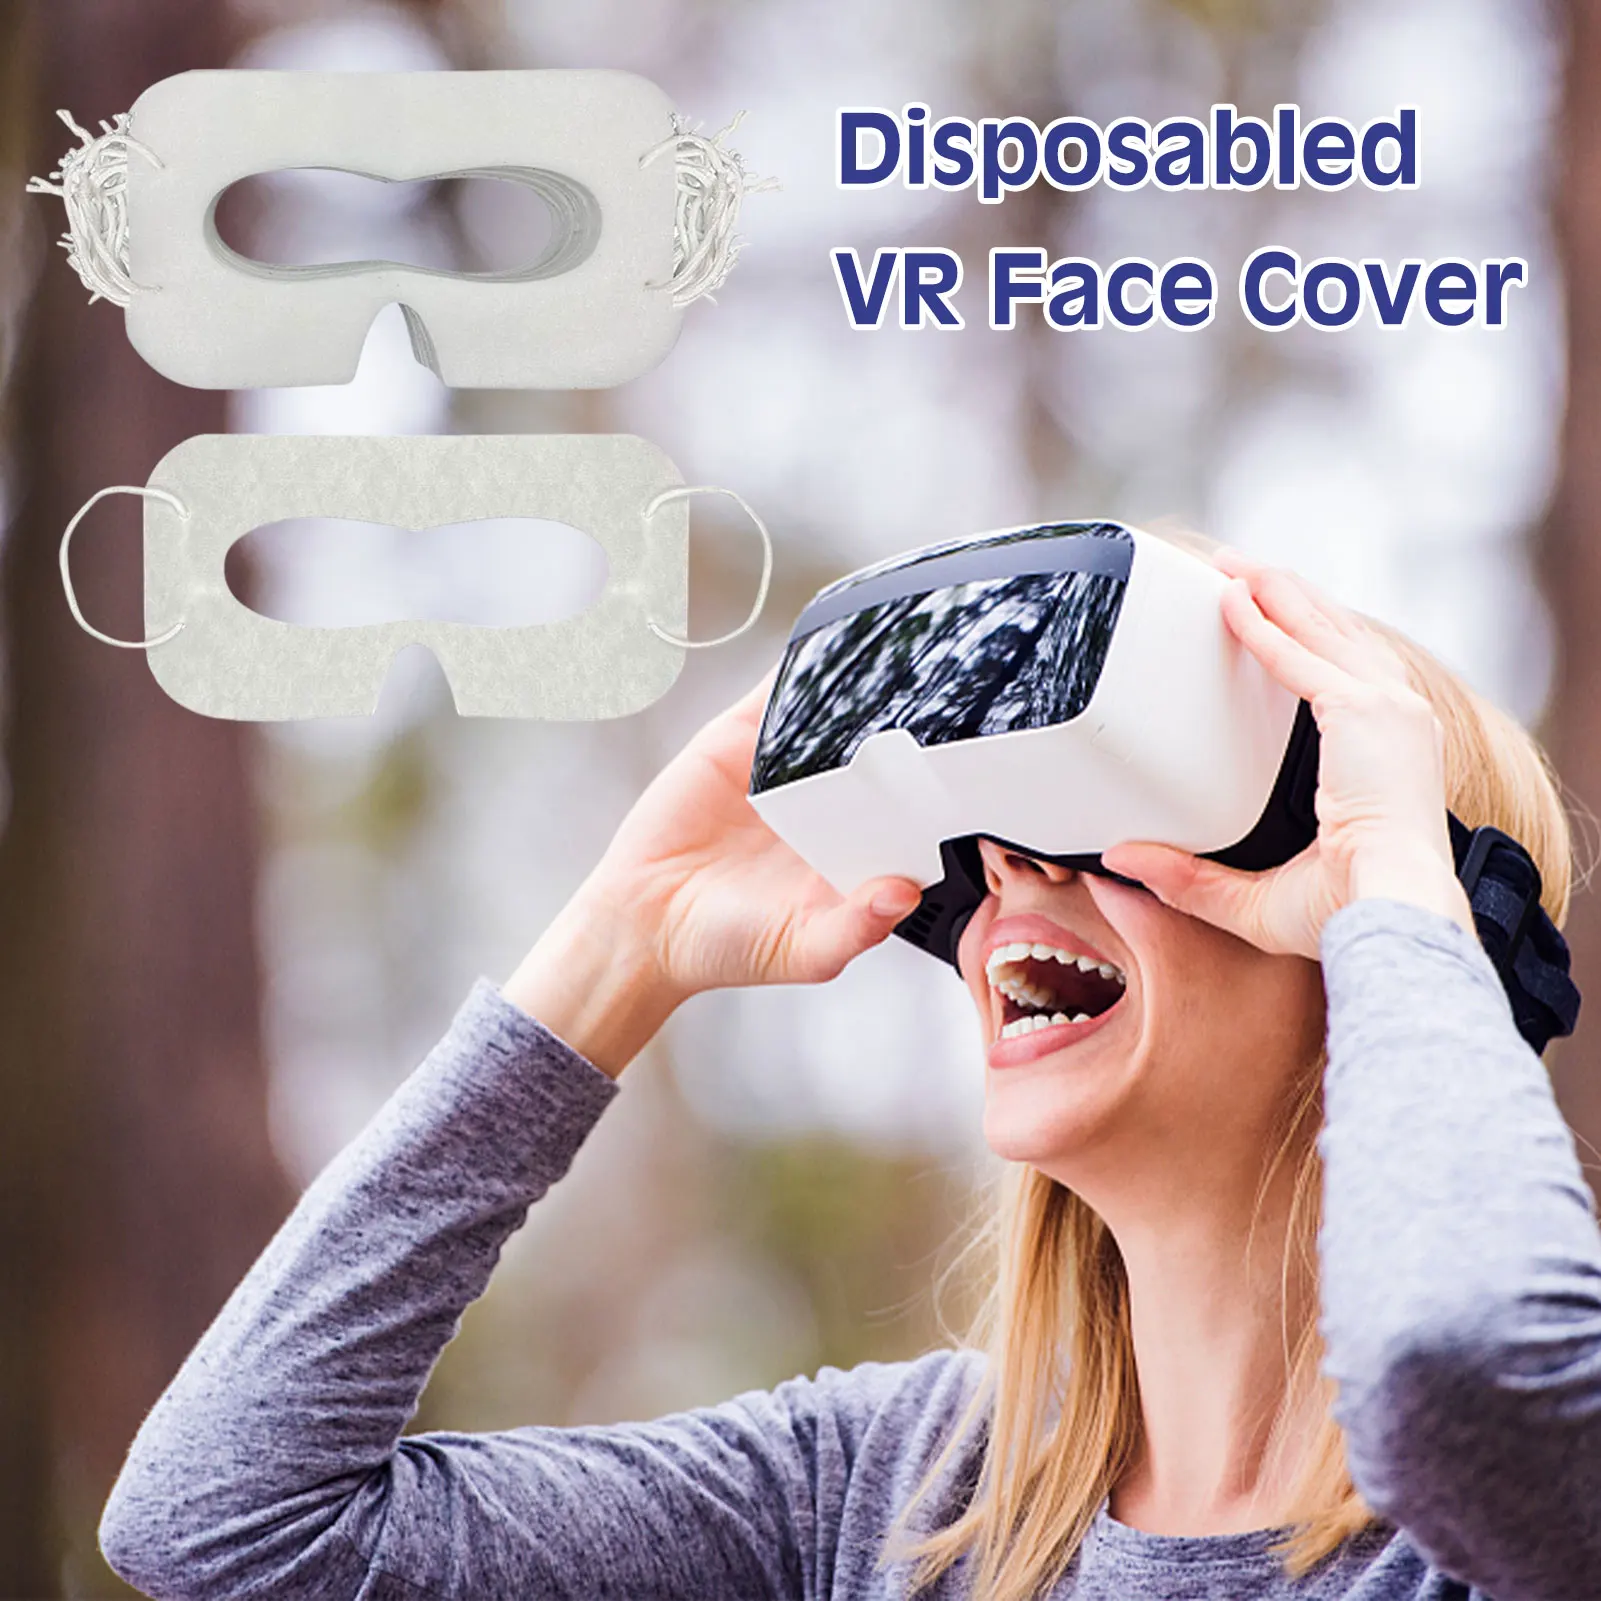 

VR Eye Face Cover 100 Pack Sanitary VR Disposabled VR Eve Covers Universal Face Cover Pad For VR VR Eye Cover For Virtual Realit